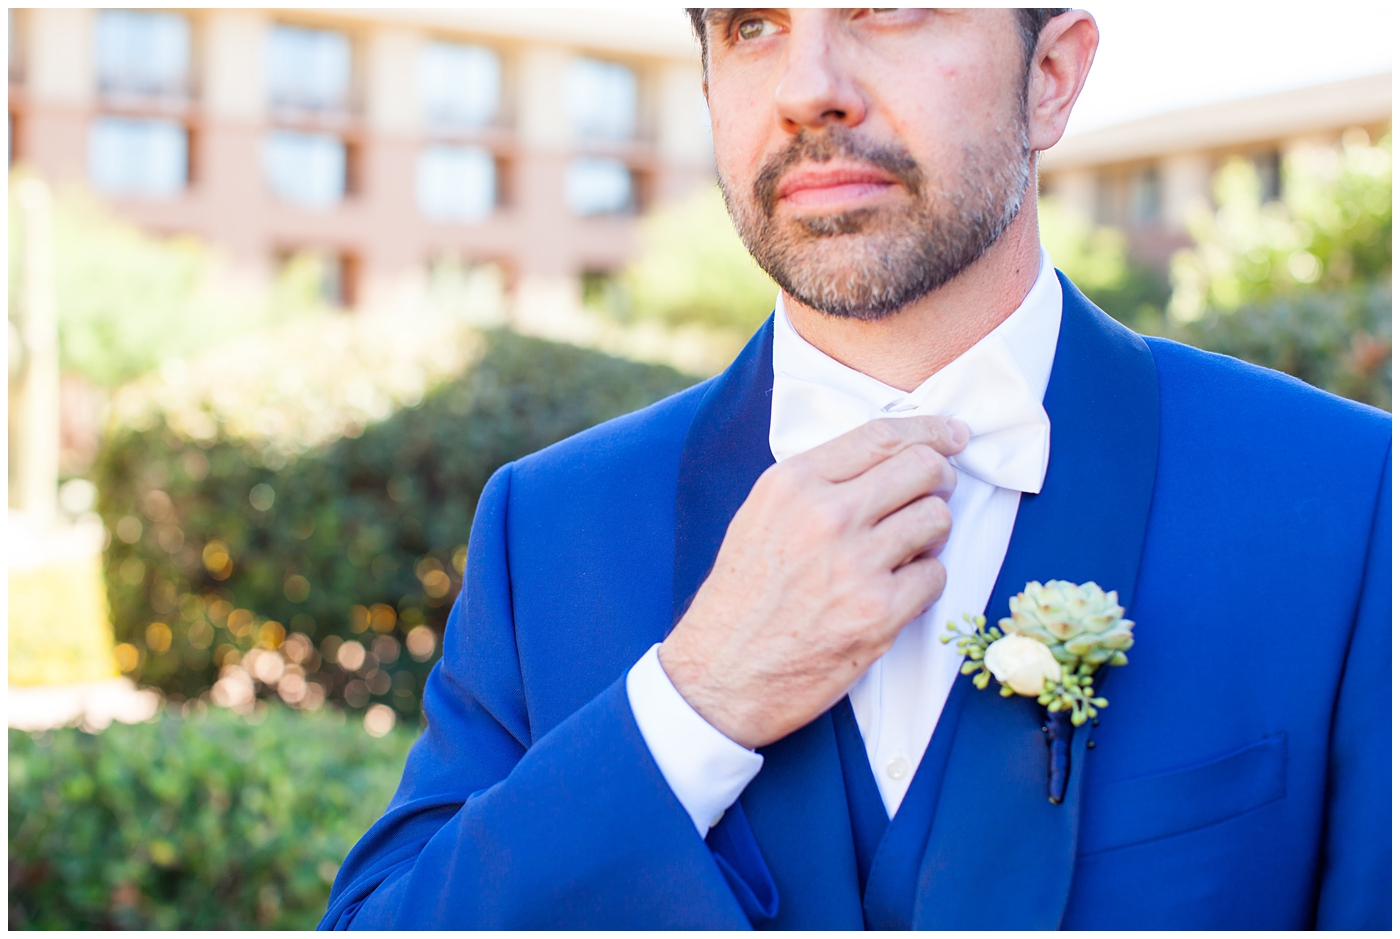 Groom in a custom Brother's Tailors Blue suit